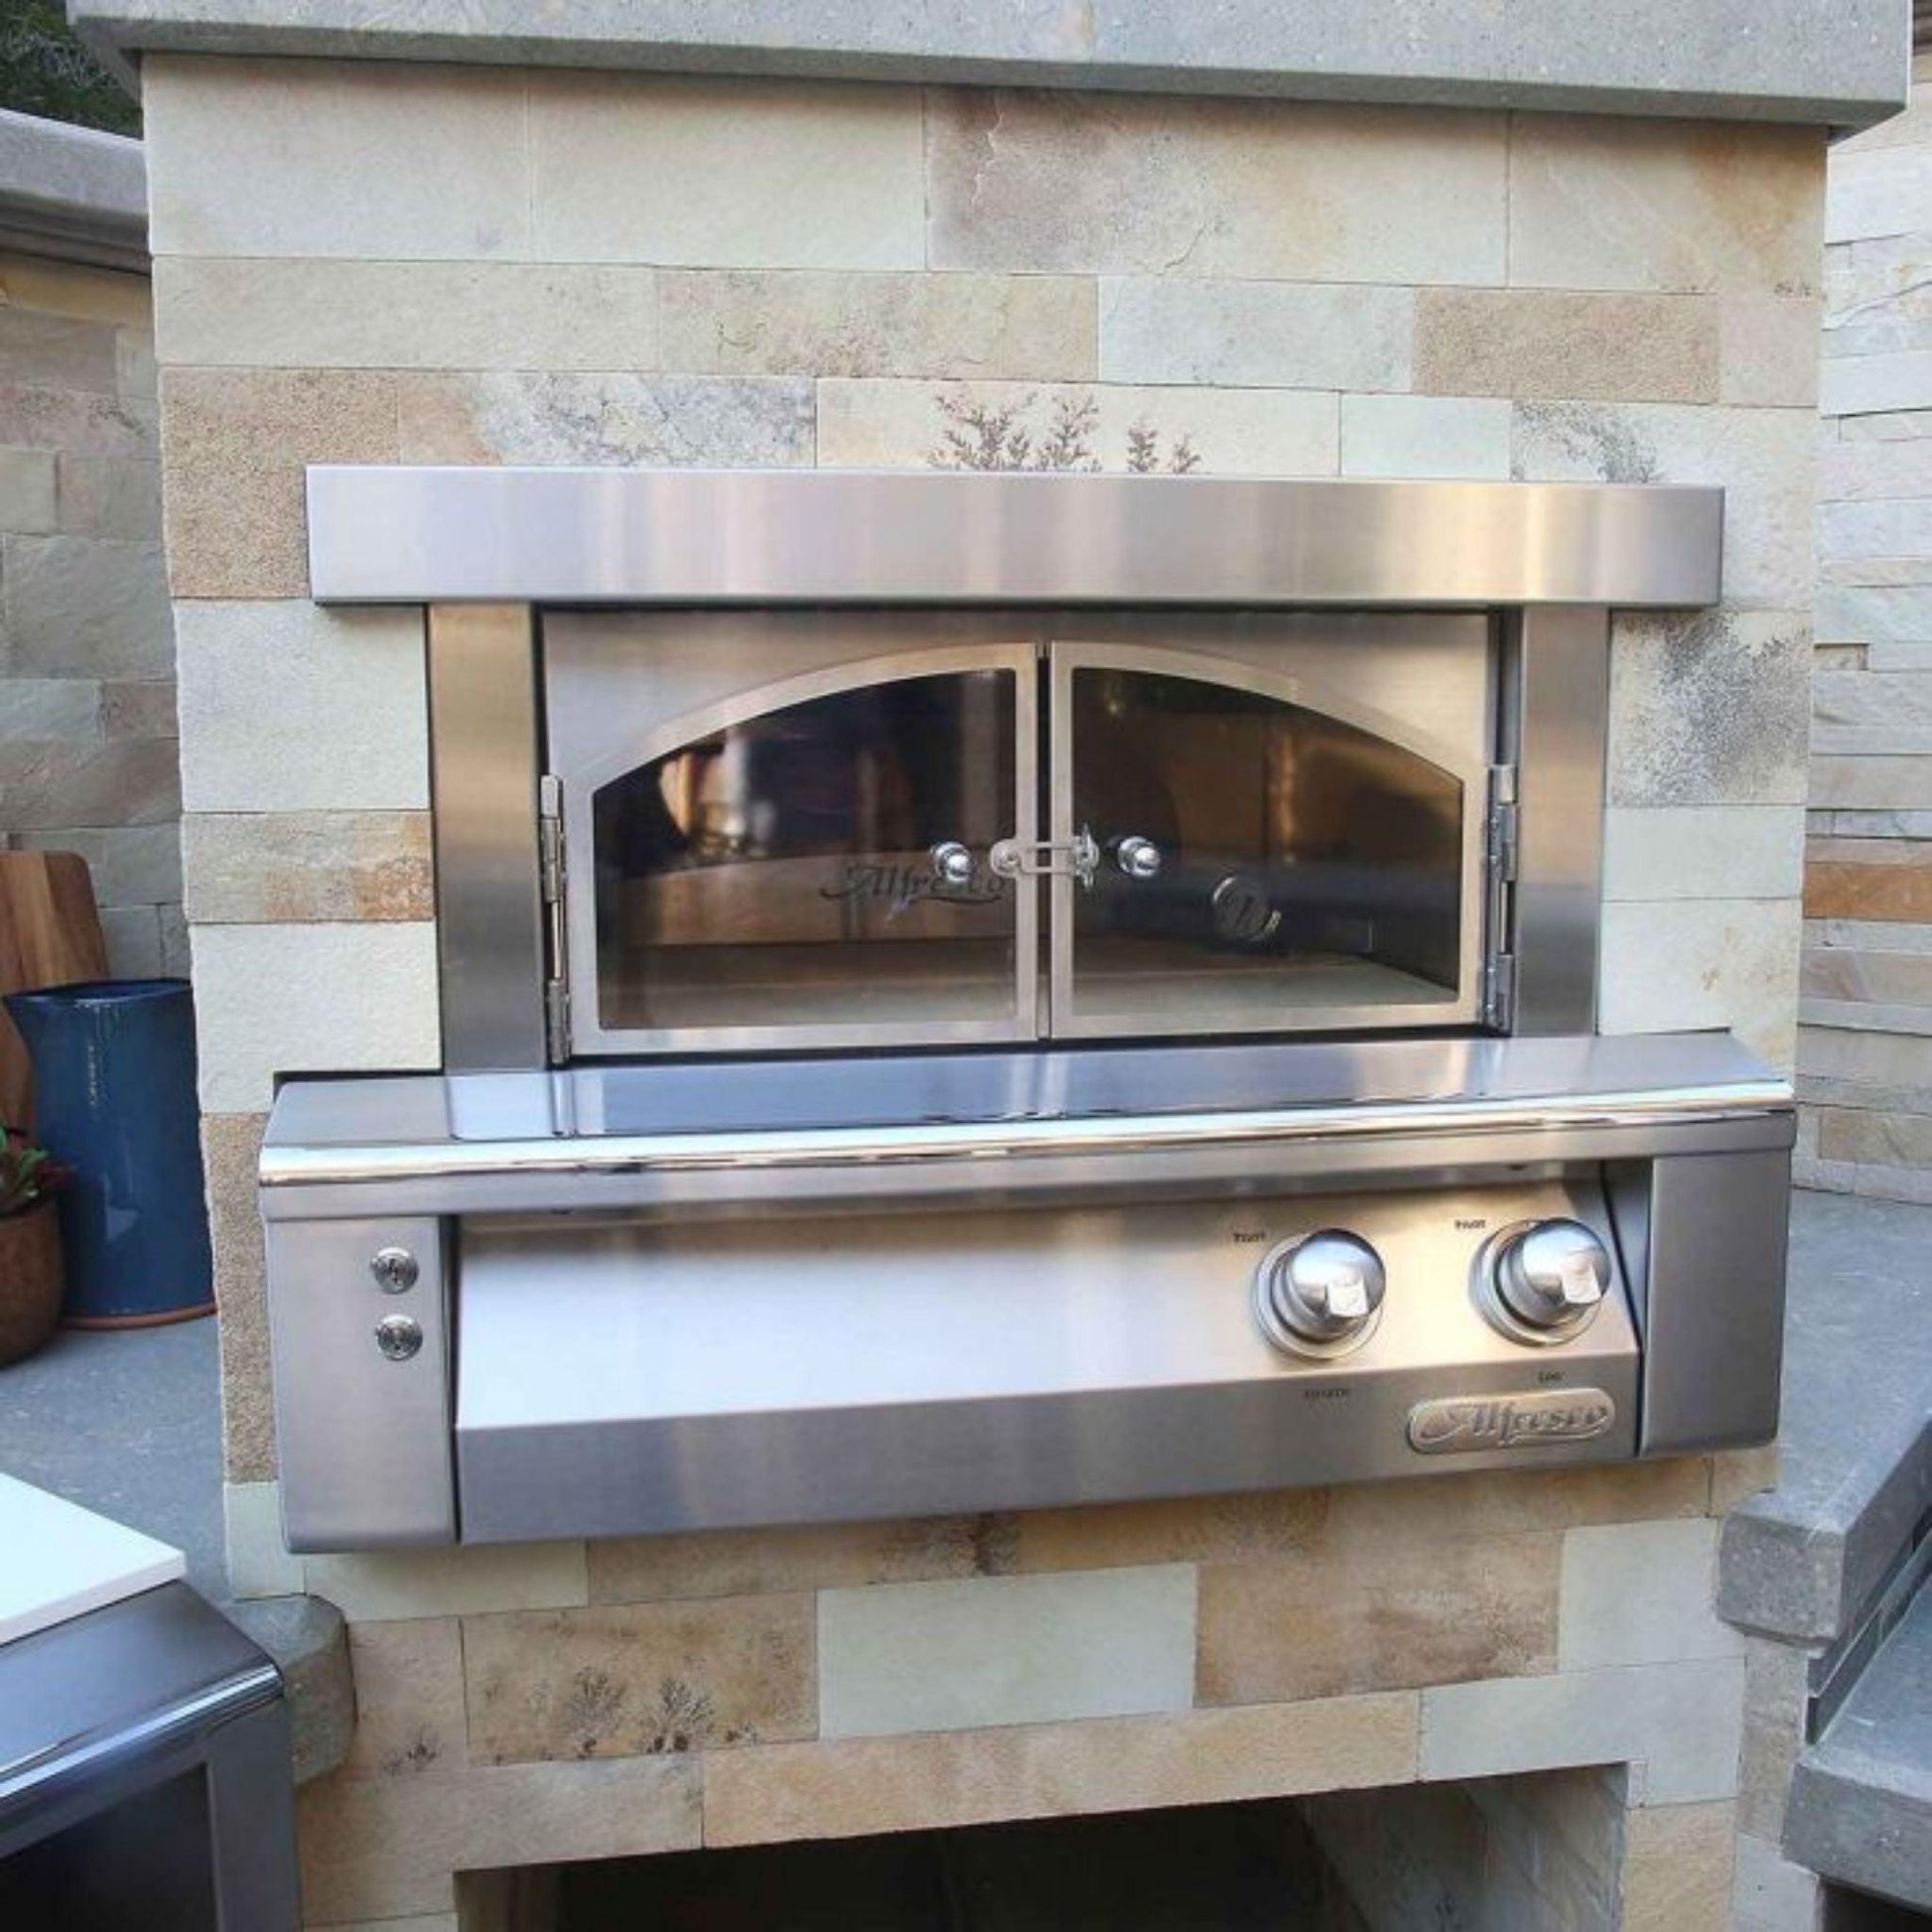 Alfresco 30" Stainless Steel Liquid Propane Pizza Oven for Built-in Installations